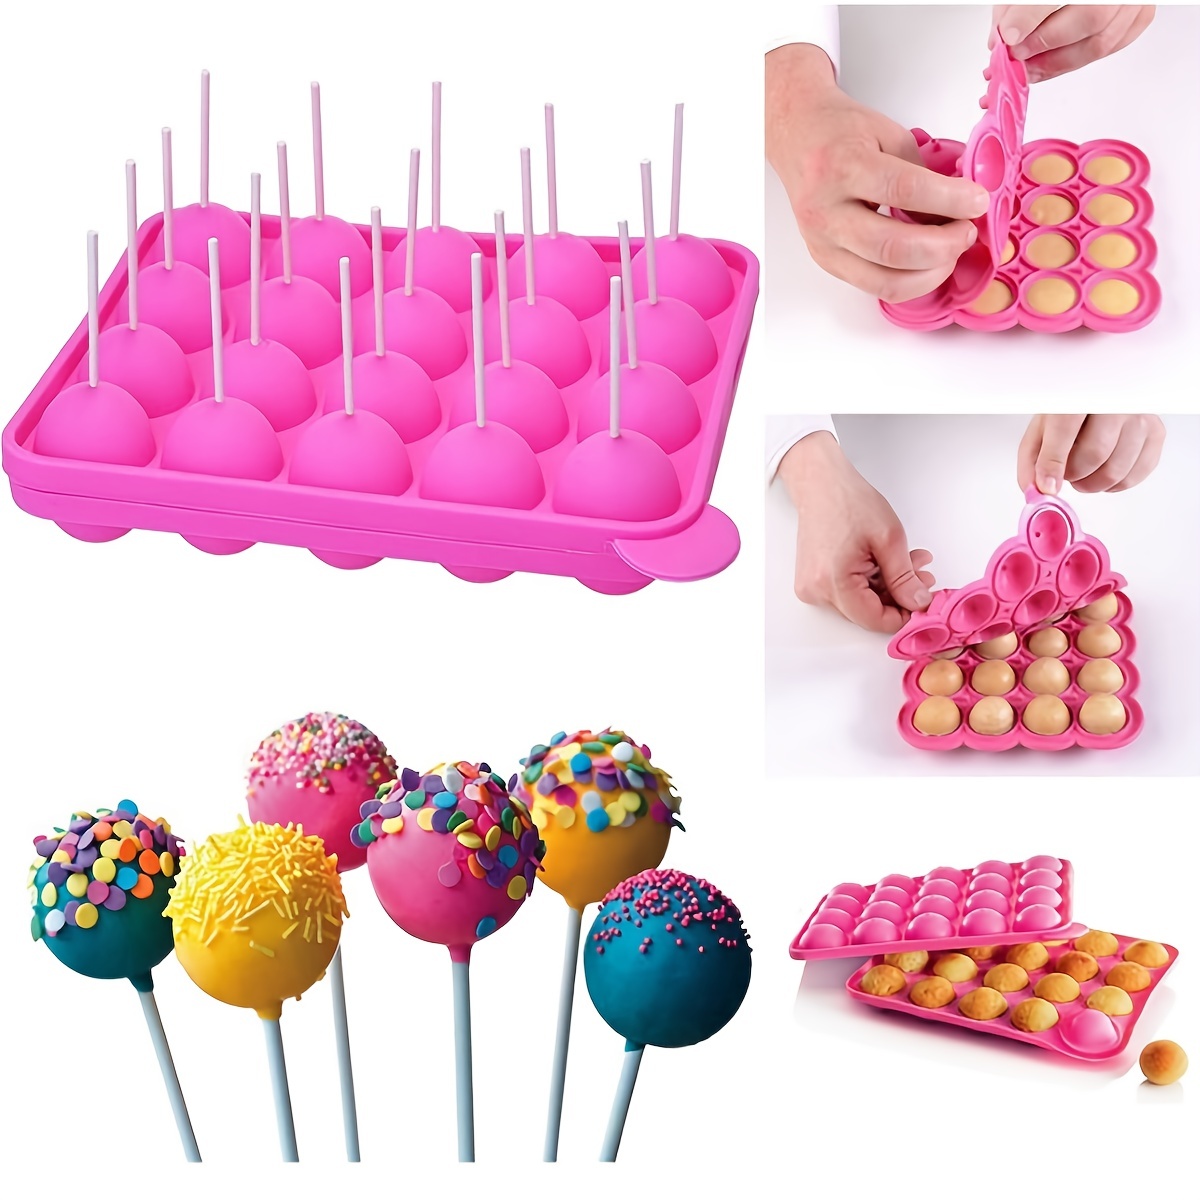 Candy Making Supplies List: Tools, Molds, Packaging & More